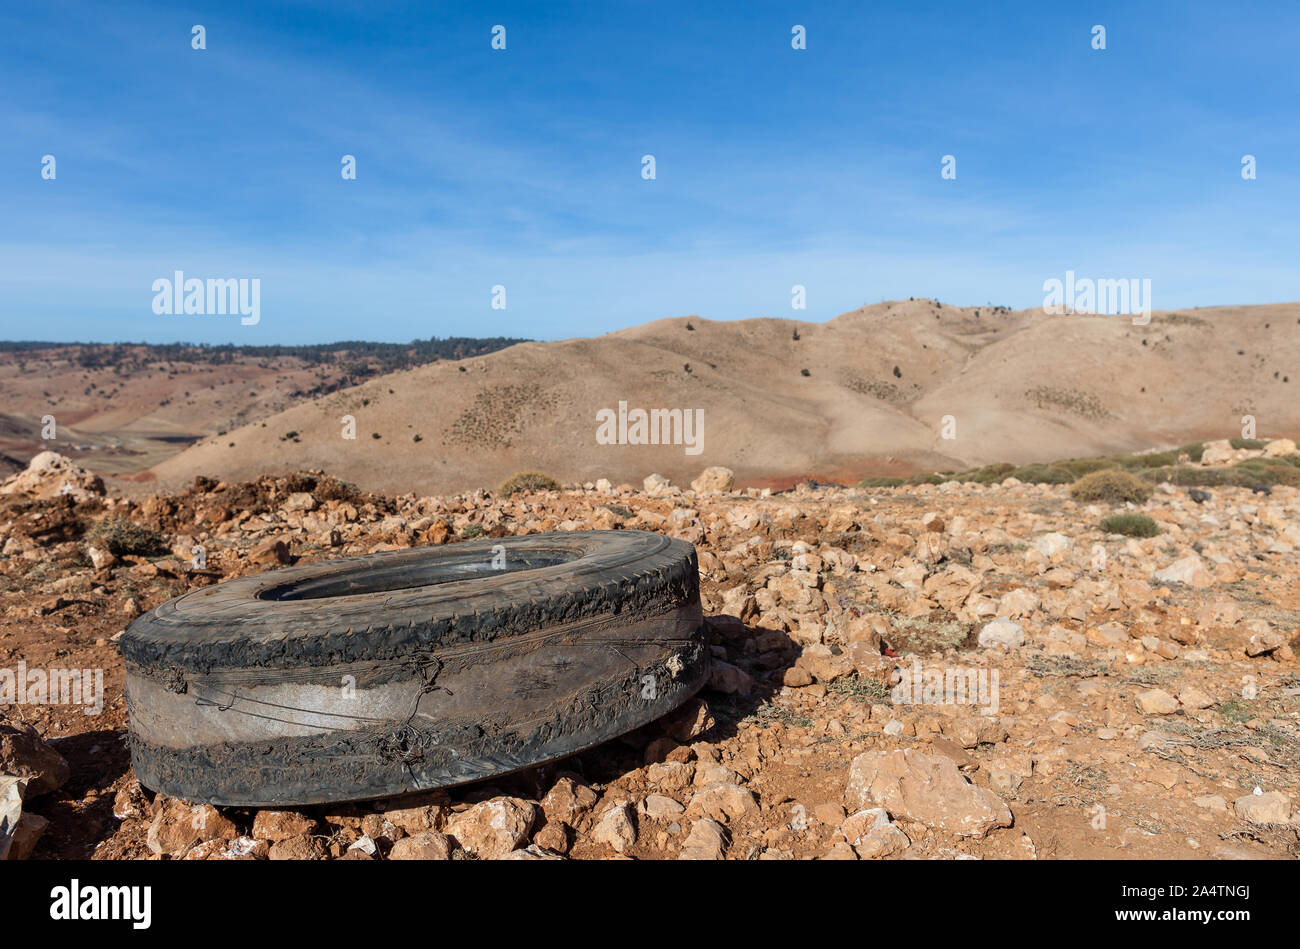 Old blown and worn out tire lying in the dirt and gravel beside a road in Morocco. Some hills are visible in the background. Stock Photo